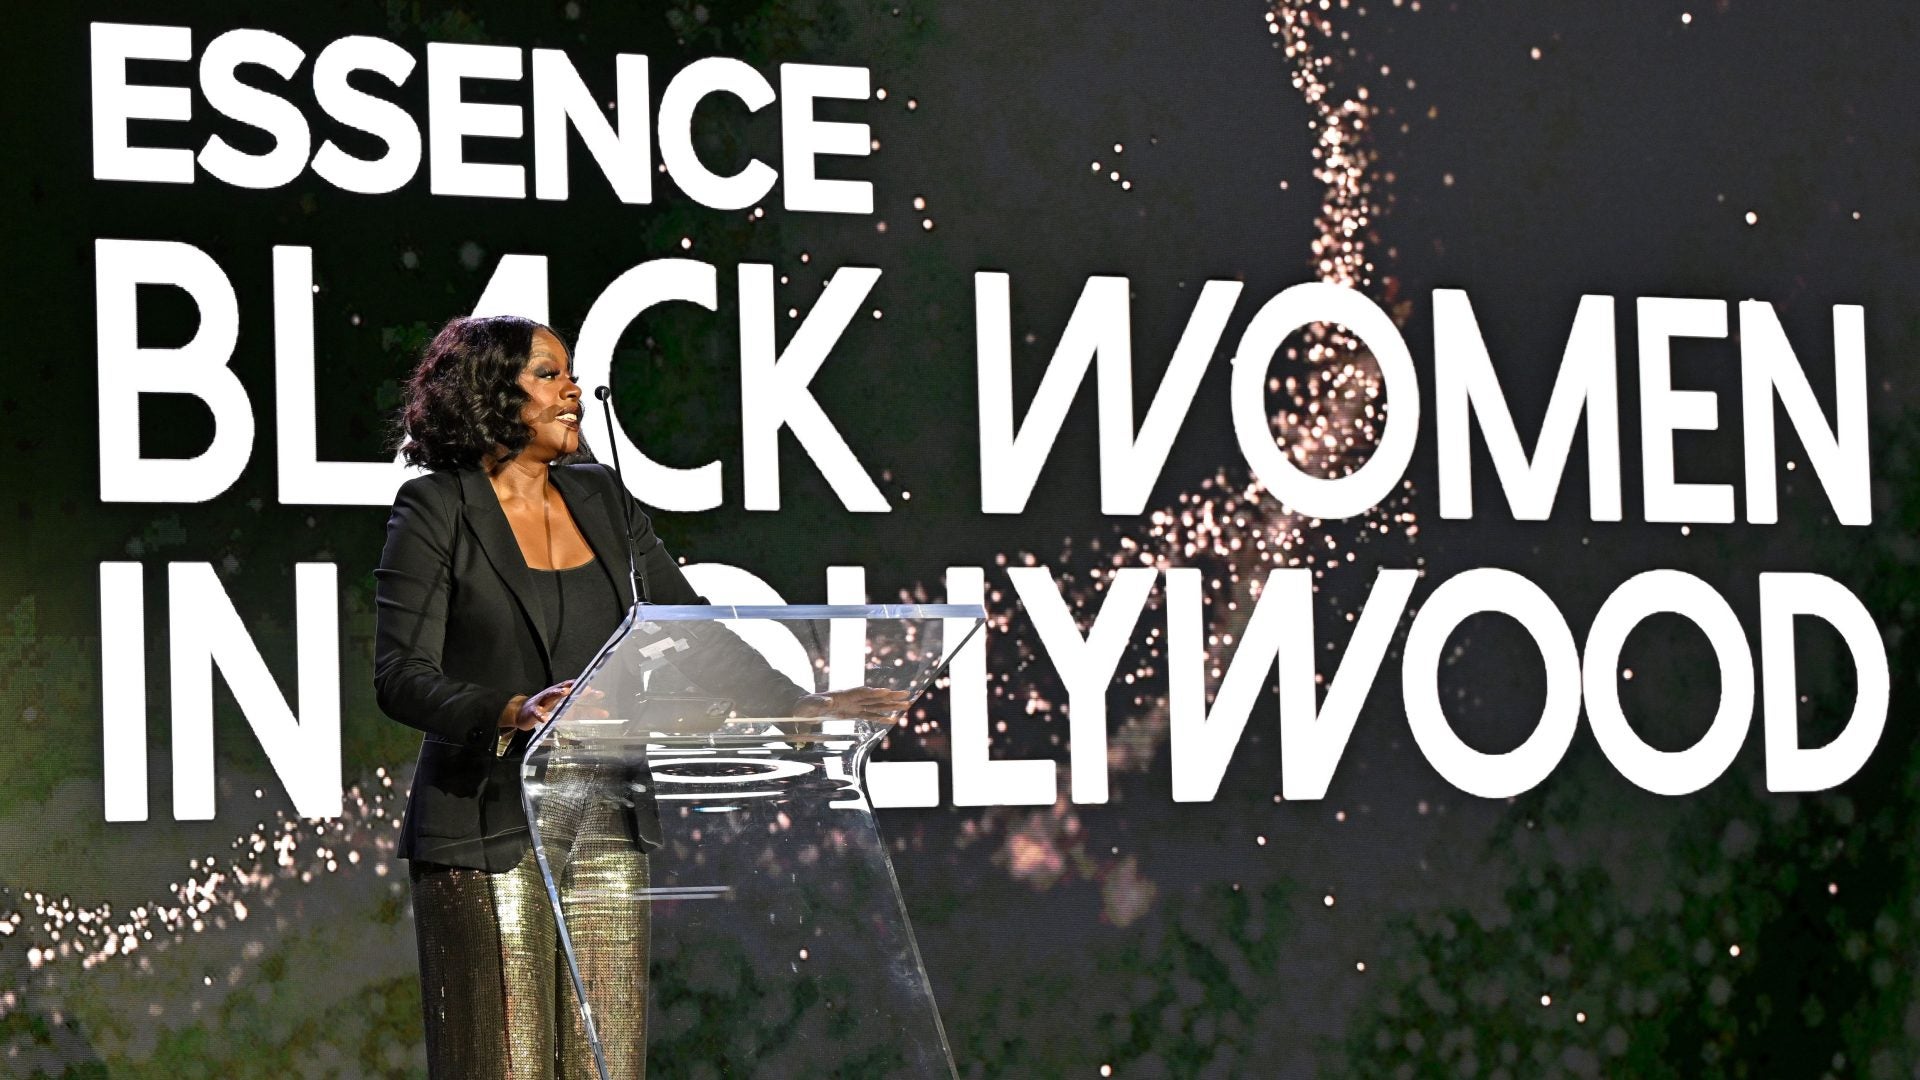 Viola Davis Praises Gina Prince-Bythewood's Artistry While Presenting Her Black Women In Hollywood Honor